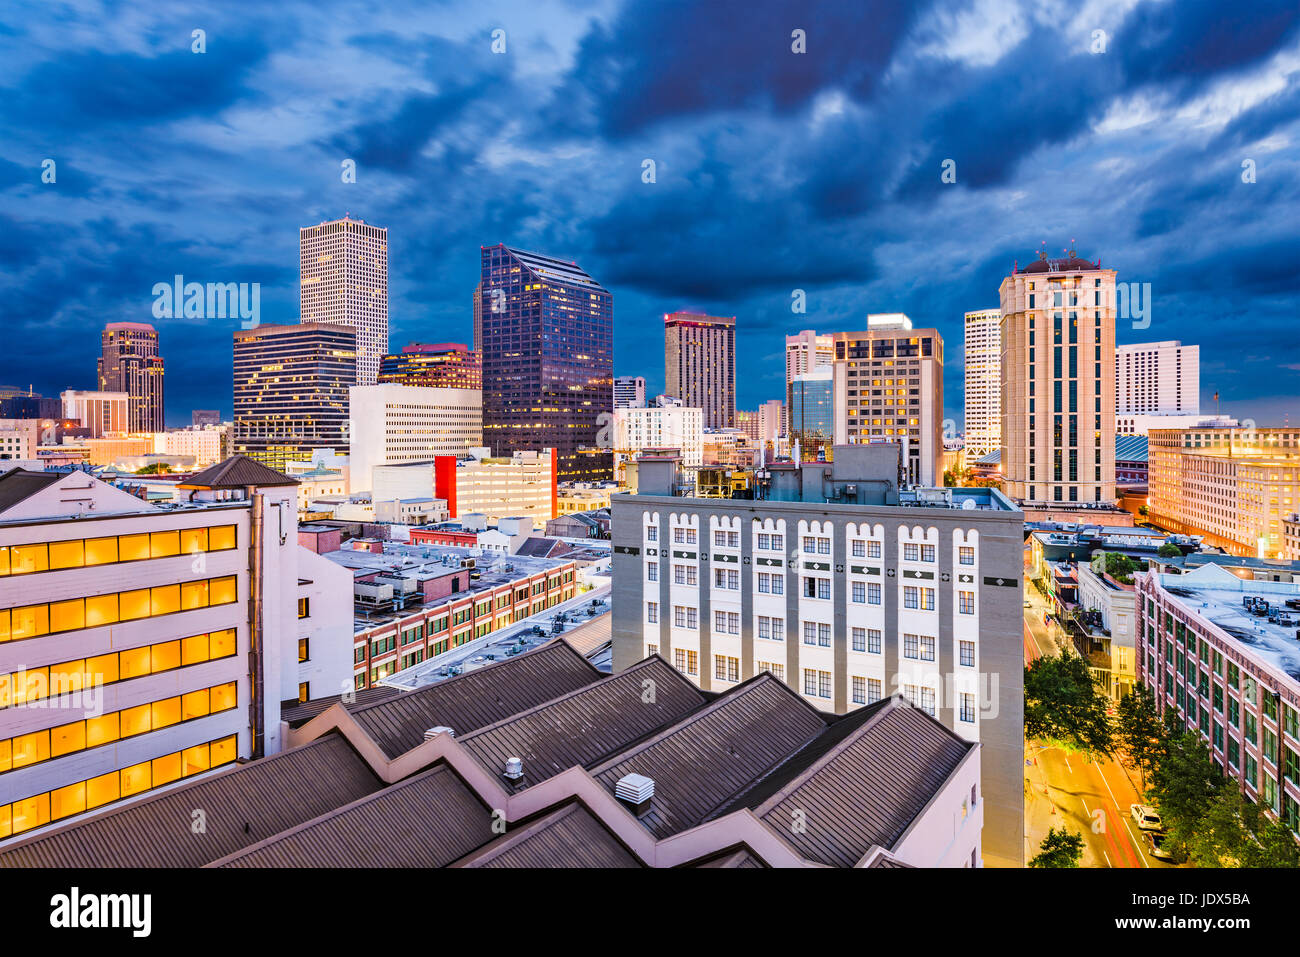 New Orleans, Louisiana, USA central business district skyline. Stock Photo